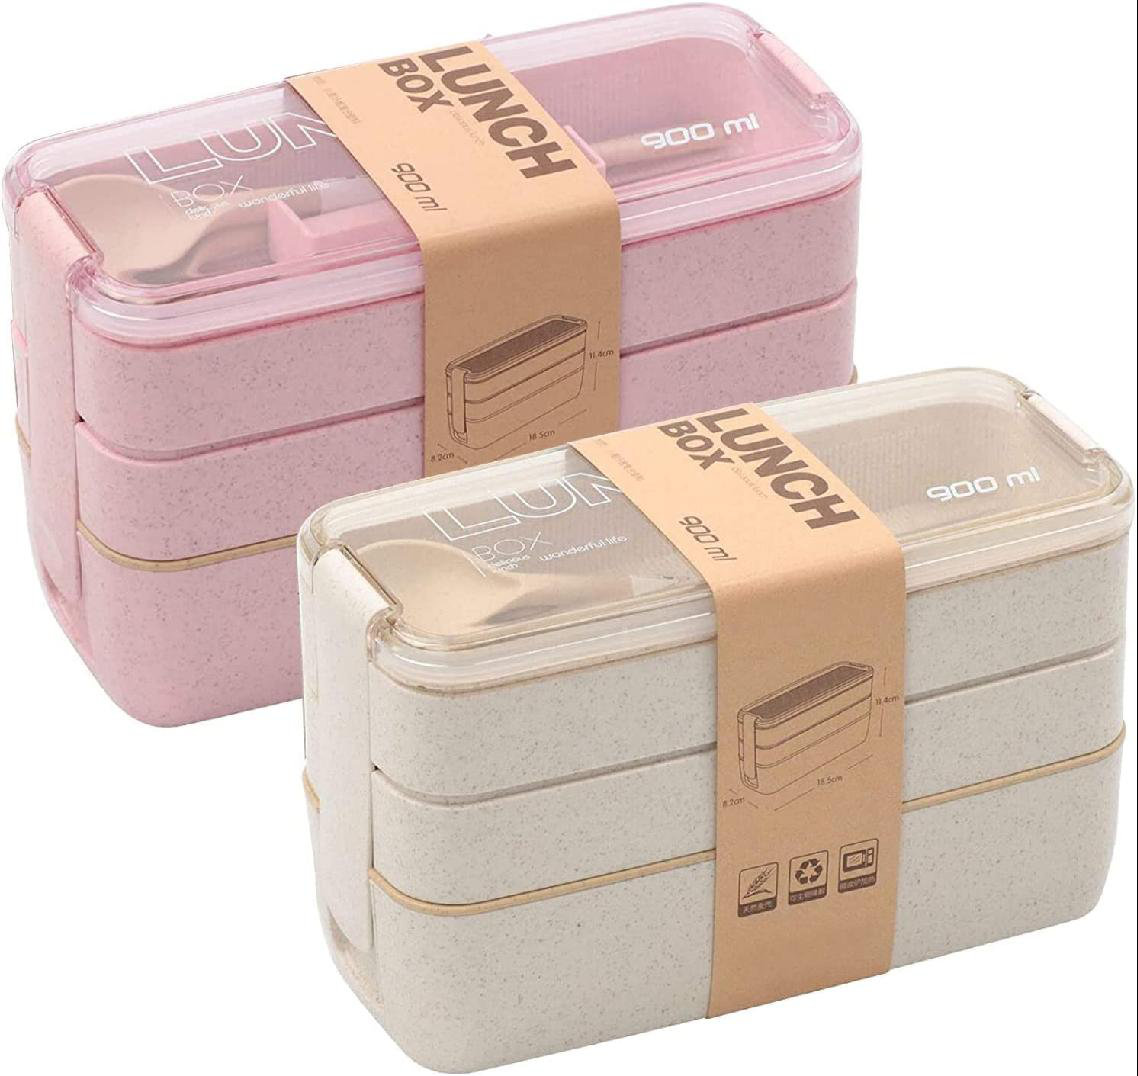 Meal Prep Containers Bento Box 12-pc. 3-Compartment Container Set